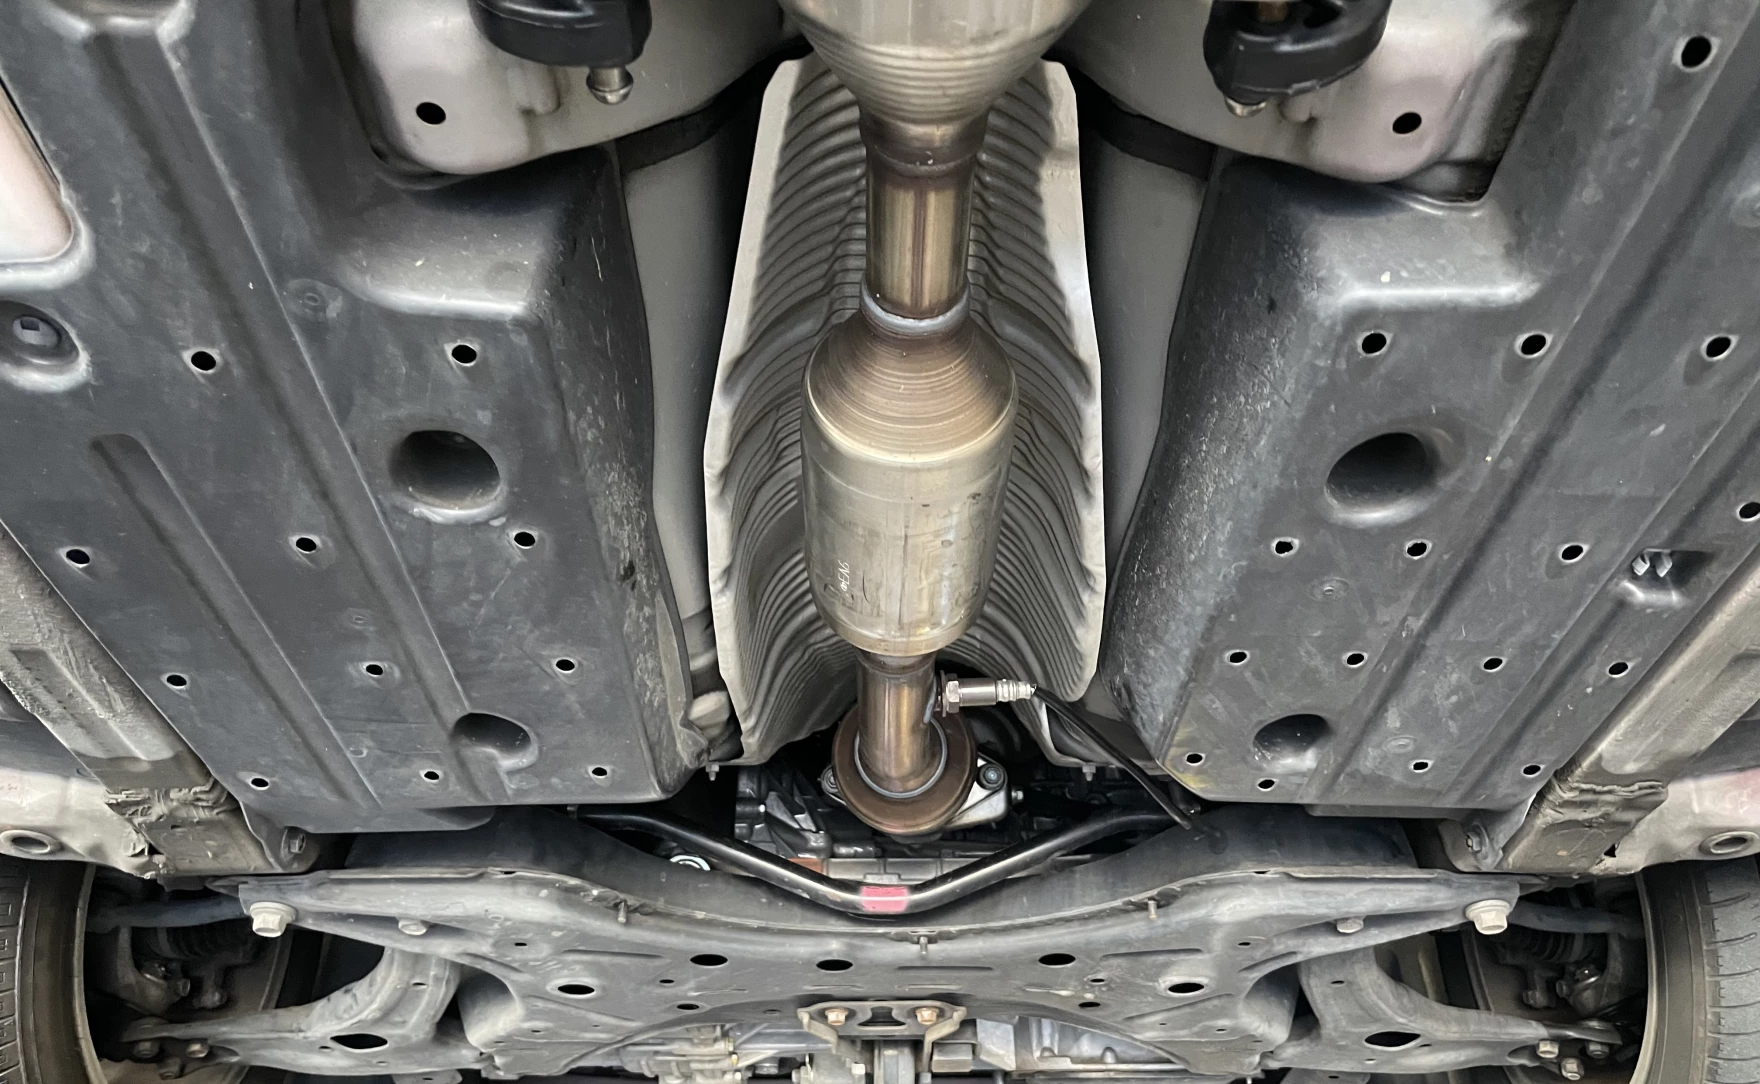 Why do catalytic converter thefts usually happen?